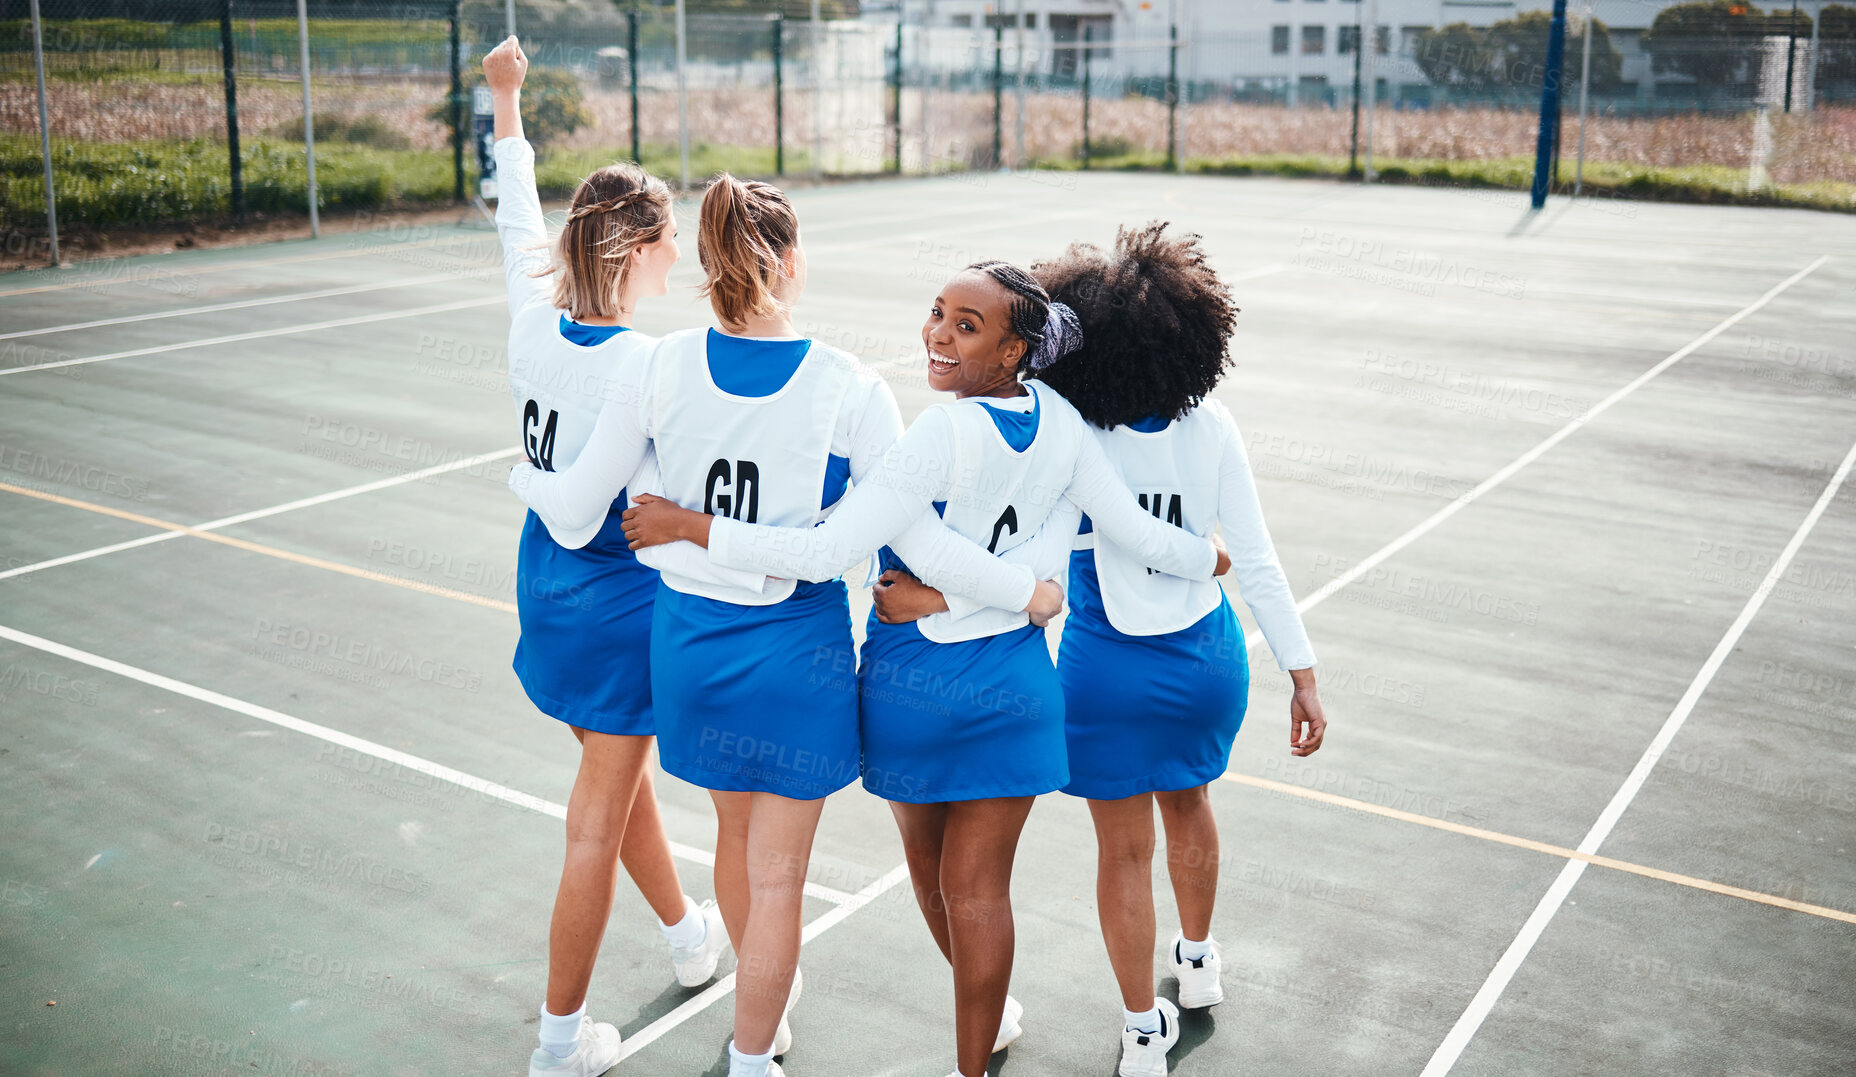 Buy stock photo Hug, back and portrait of a team for netball, training support and game collaboration on a court. Teamwork, motivation and athlete girls ready to start a sport with group unity, together and bonding